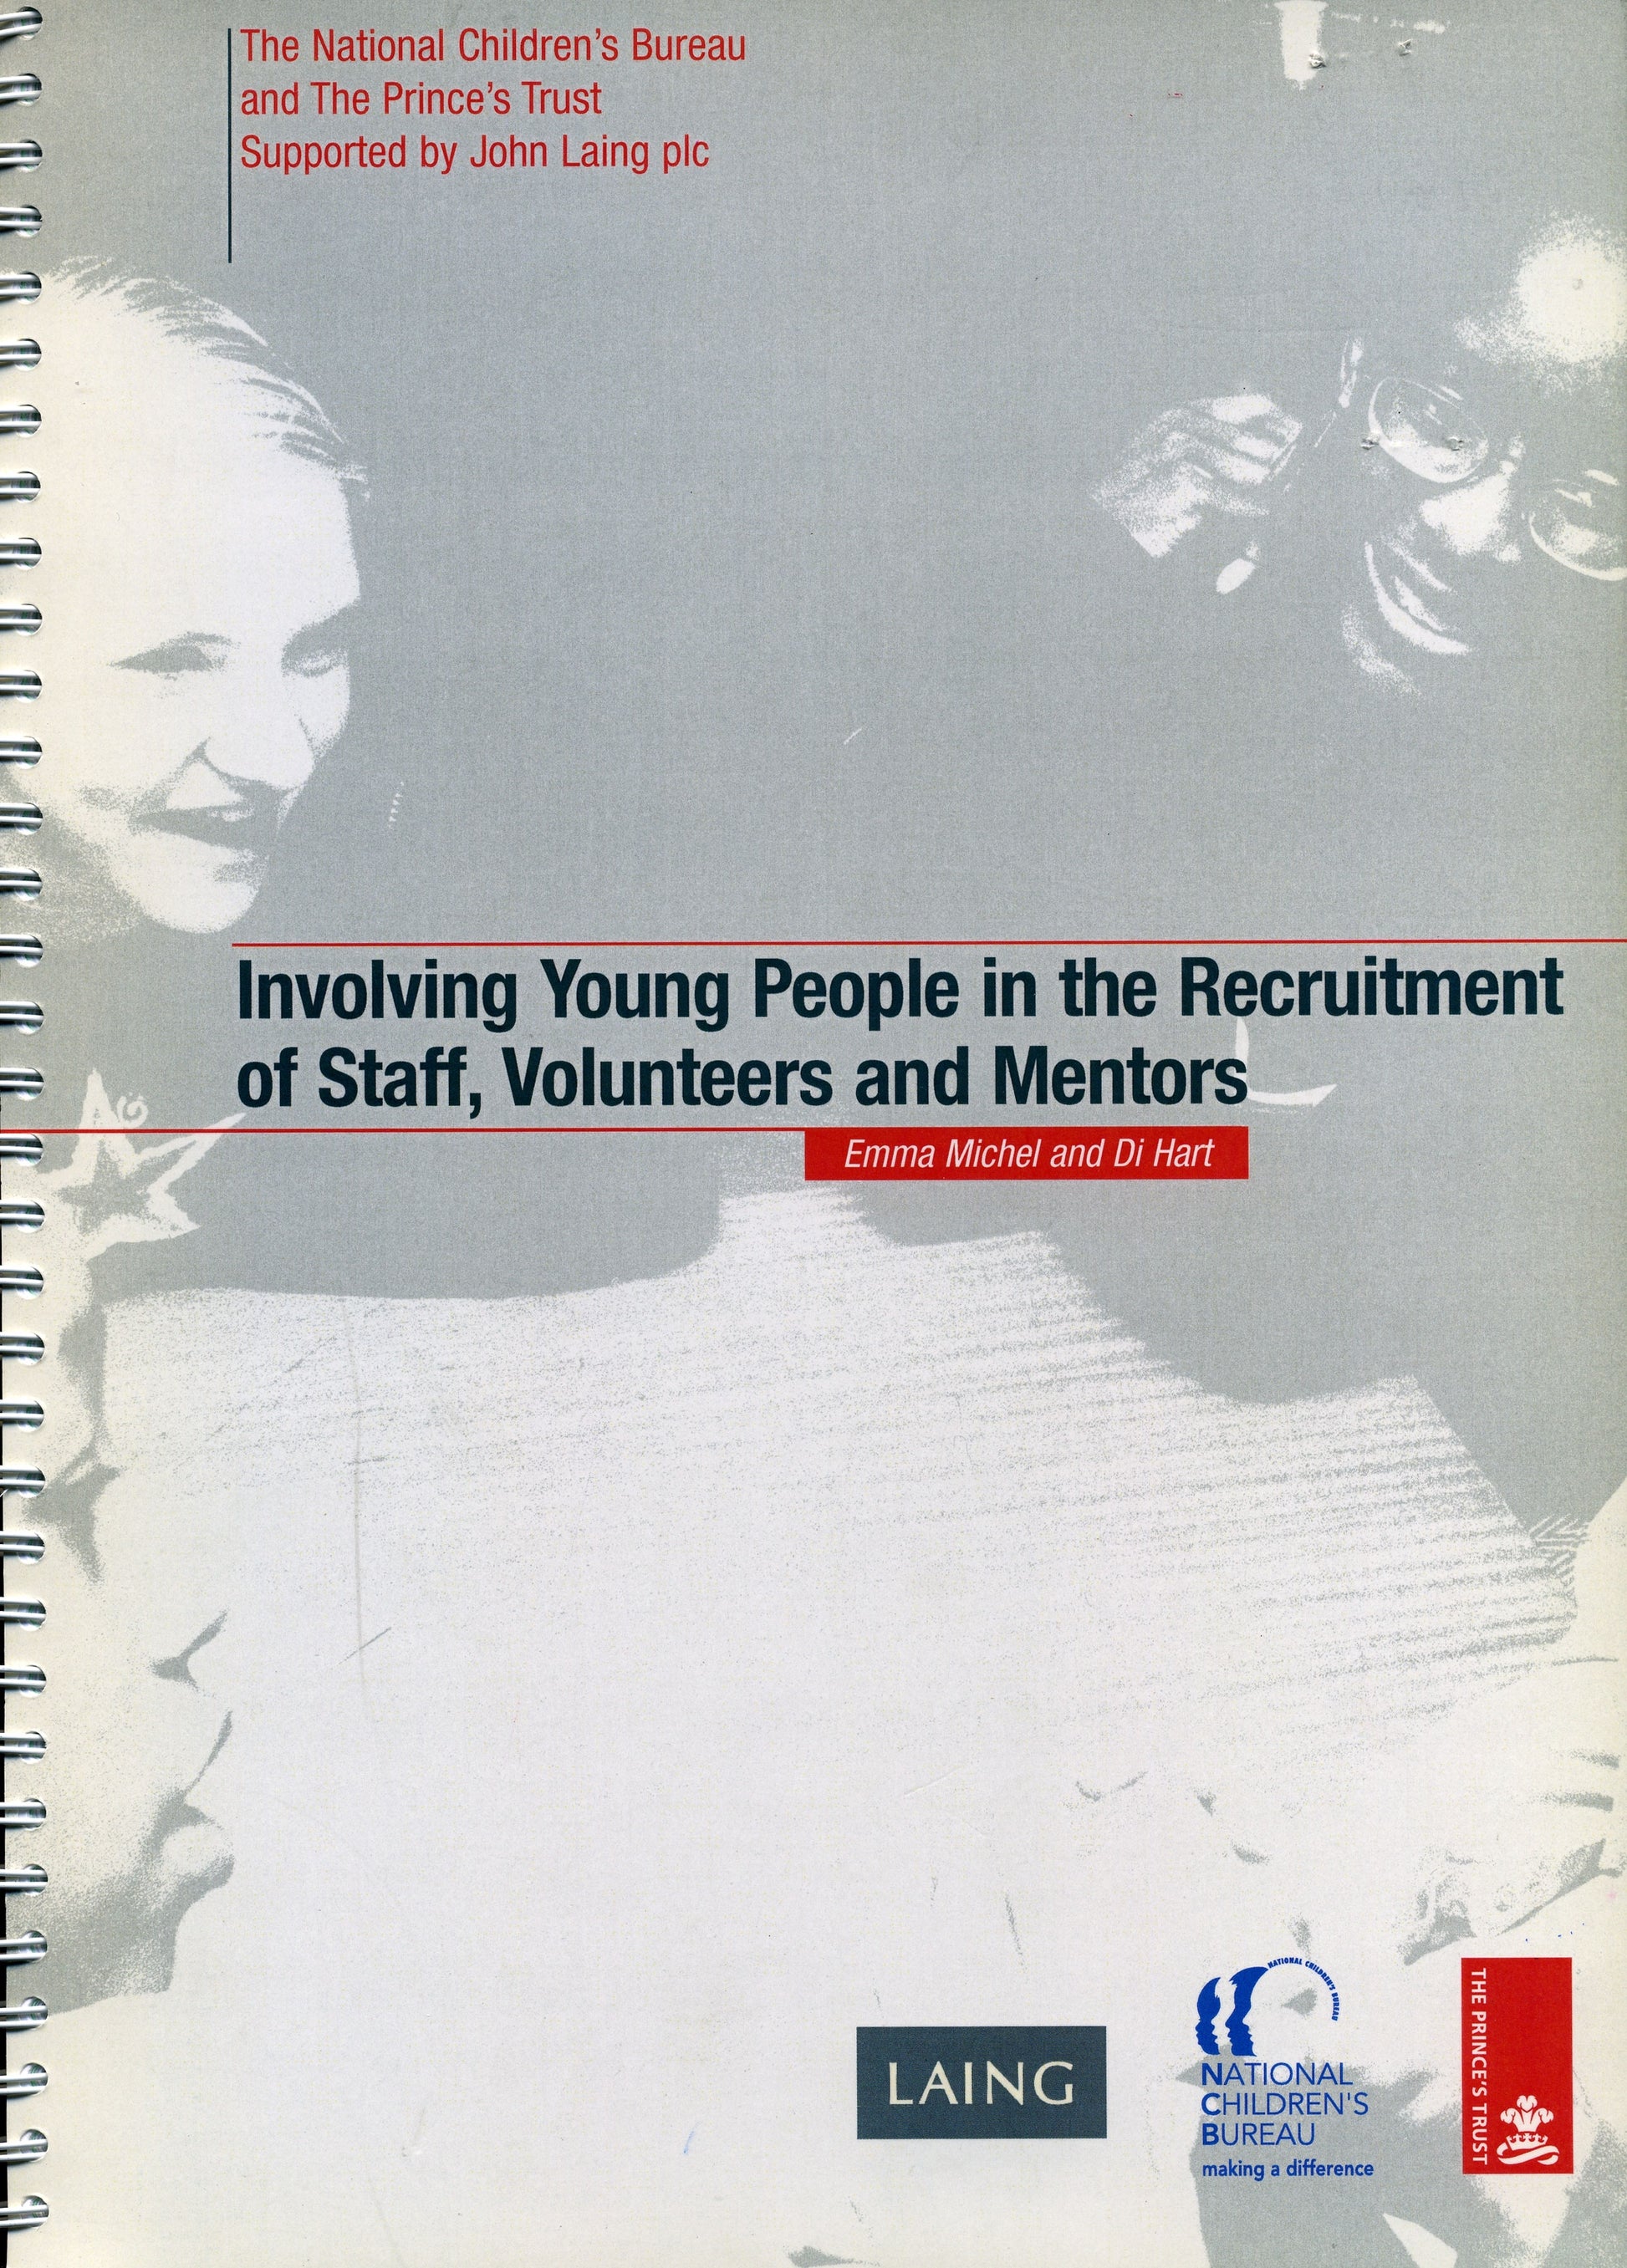 Involving Young People in the Recruitment of Staff, Volunteers and Mentors by Di Hart, Emma Michel